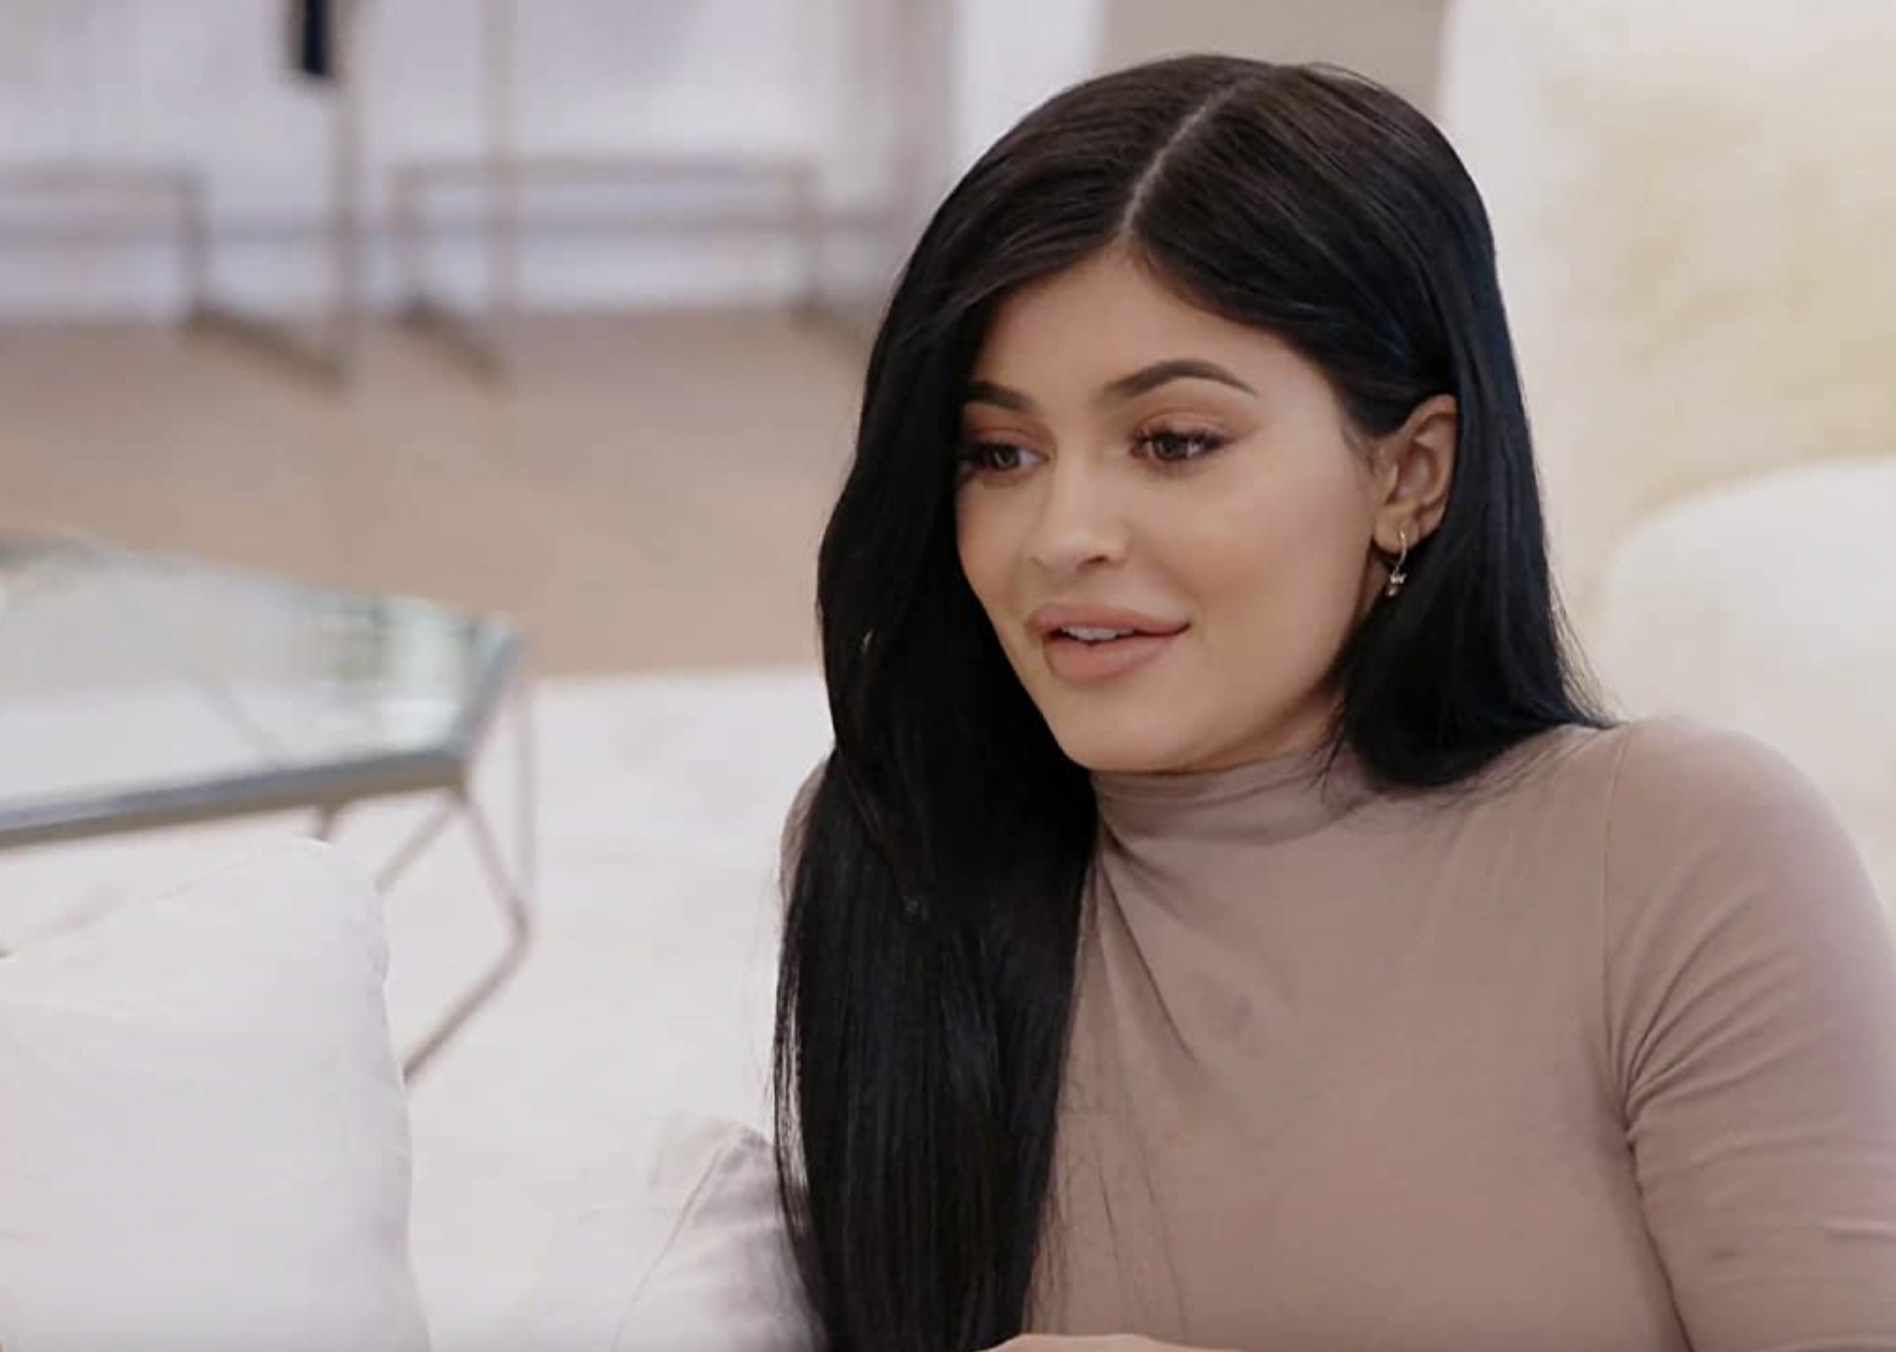 Kylie Jenner in "Life of Kylie".